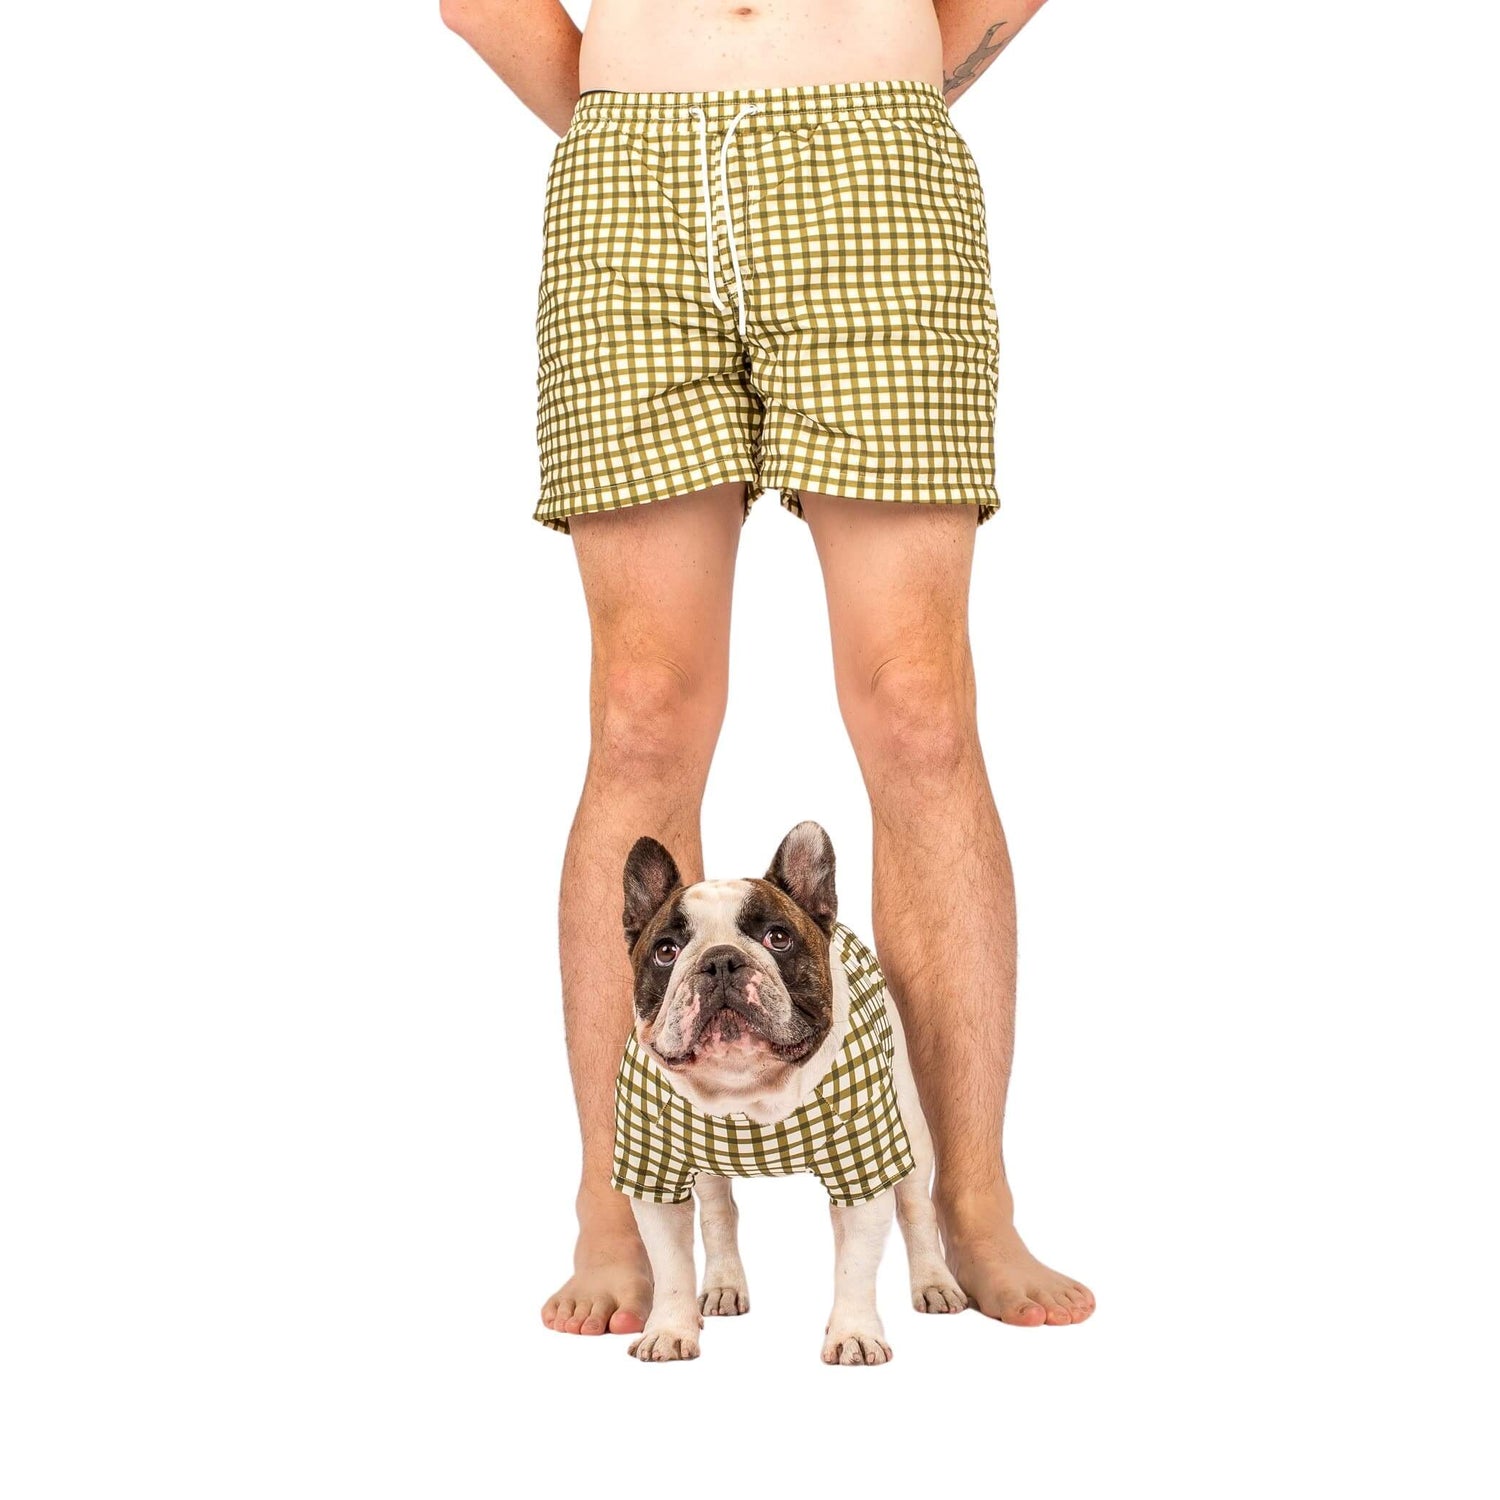 A close up shot showing a human wearing VIbrant Hounds Green Gingham swimshorts and a French Bulldog wearing Vibrant Hounds Green Gingham Rash shirt.